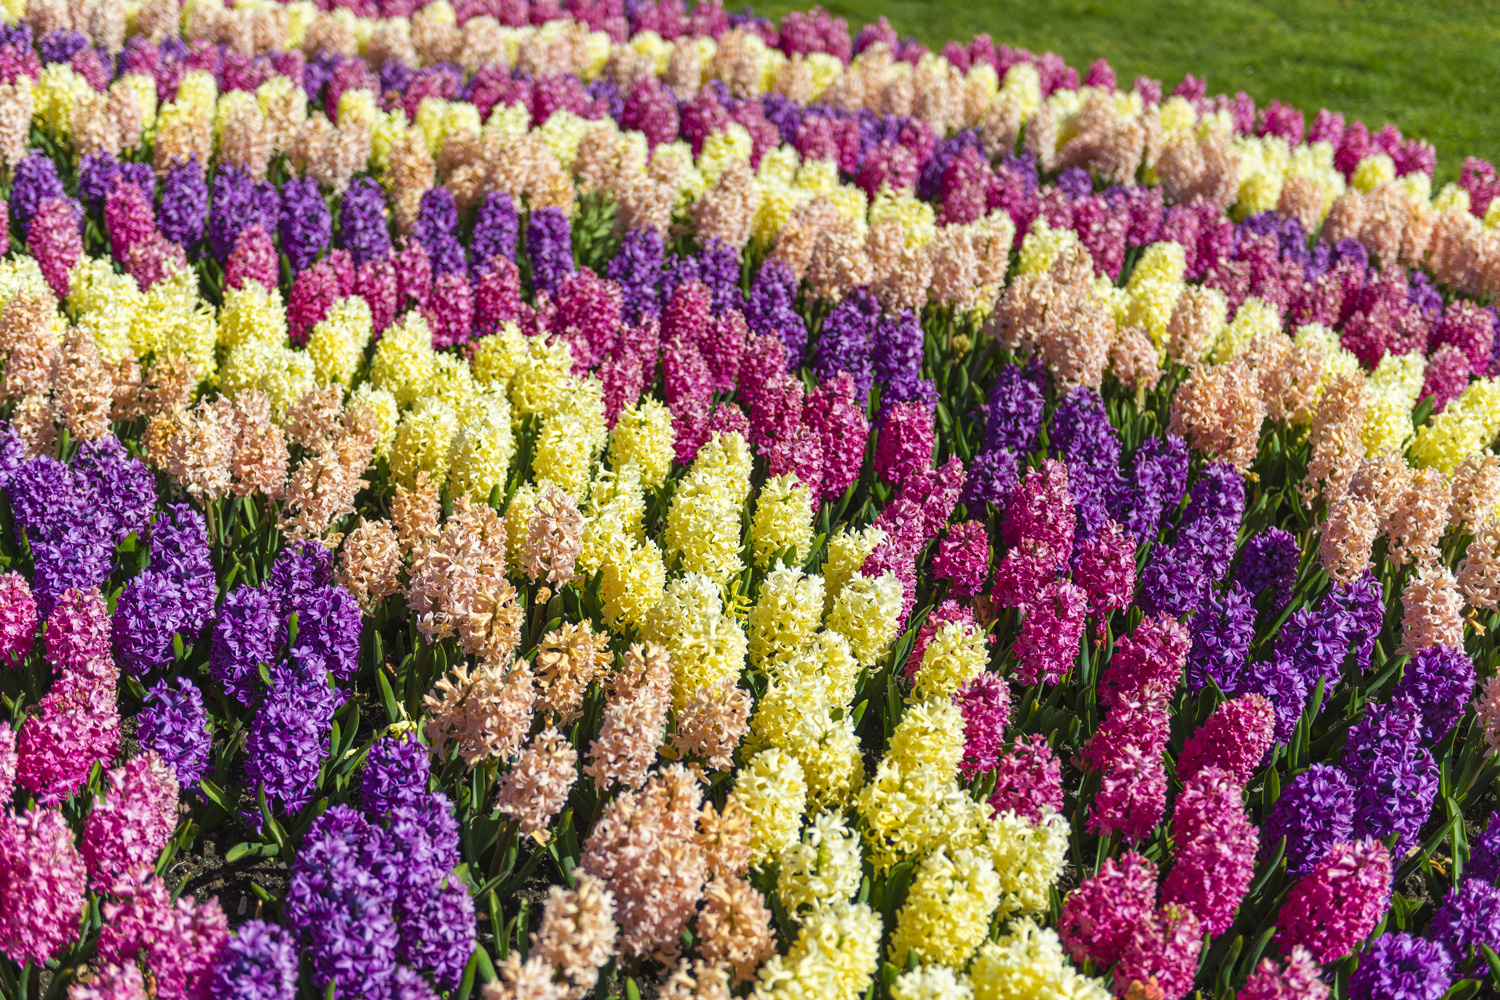 Multicolored Hyacinth flowerbed in Gothenburg garden. - Hyacinth Leaves Turning Yellow And Brown - What To Do